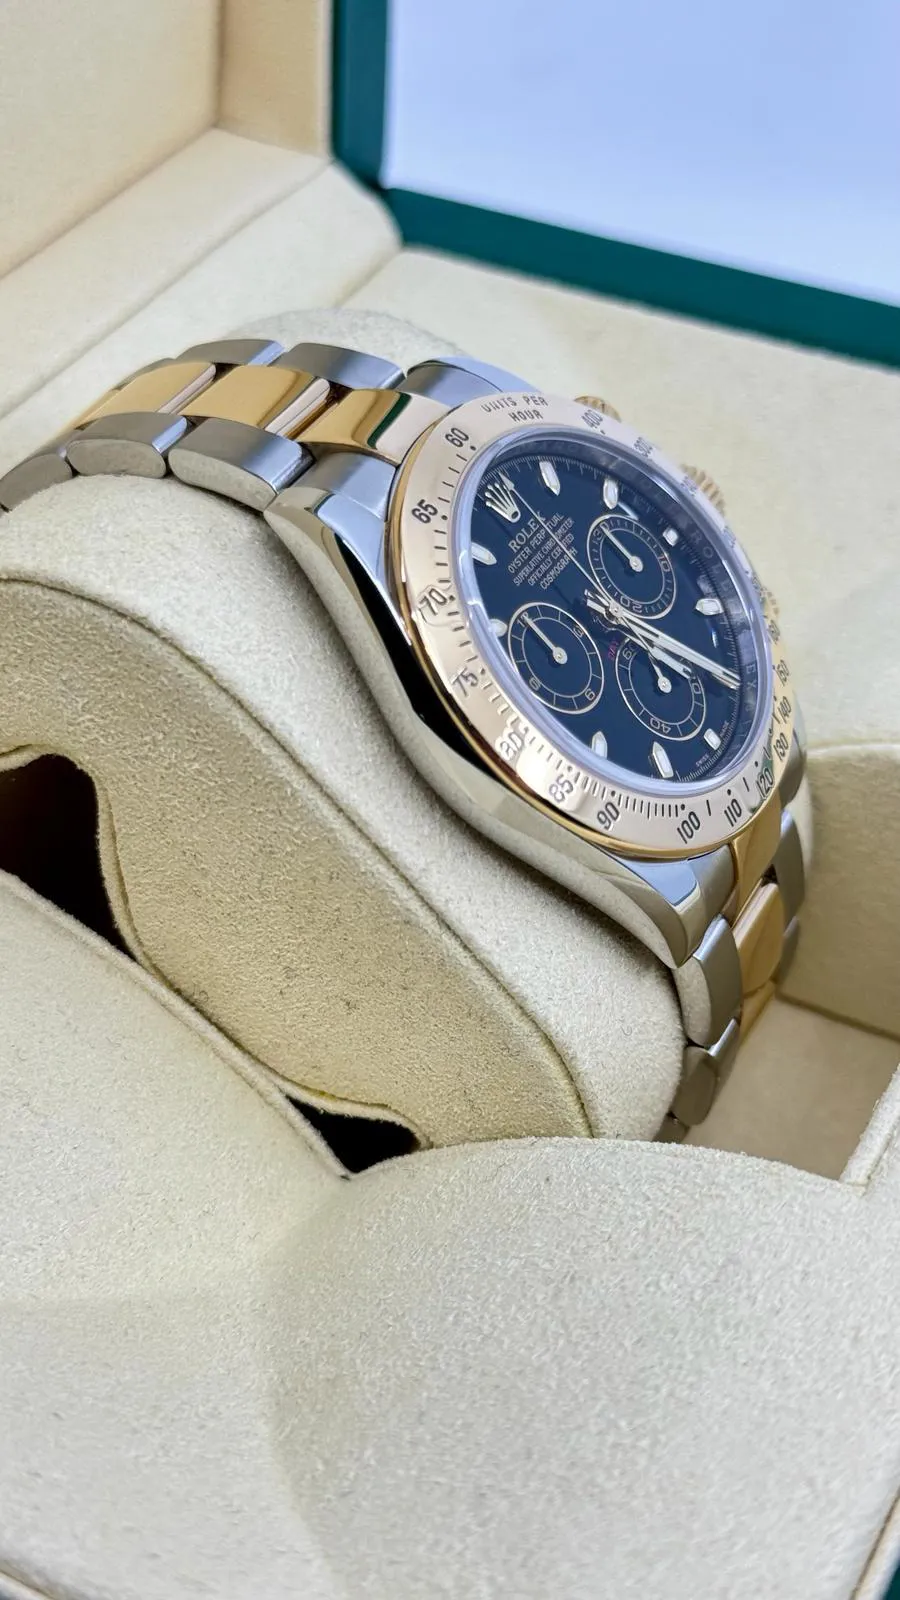 Rolex Daytona 116523 40mm Stainless steel and yellow gold 6